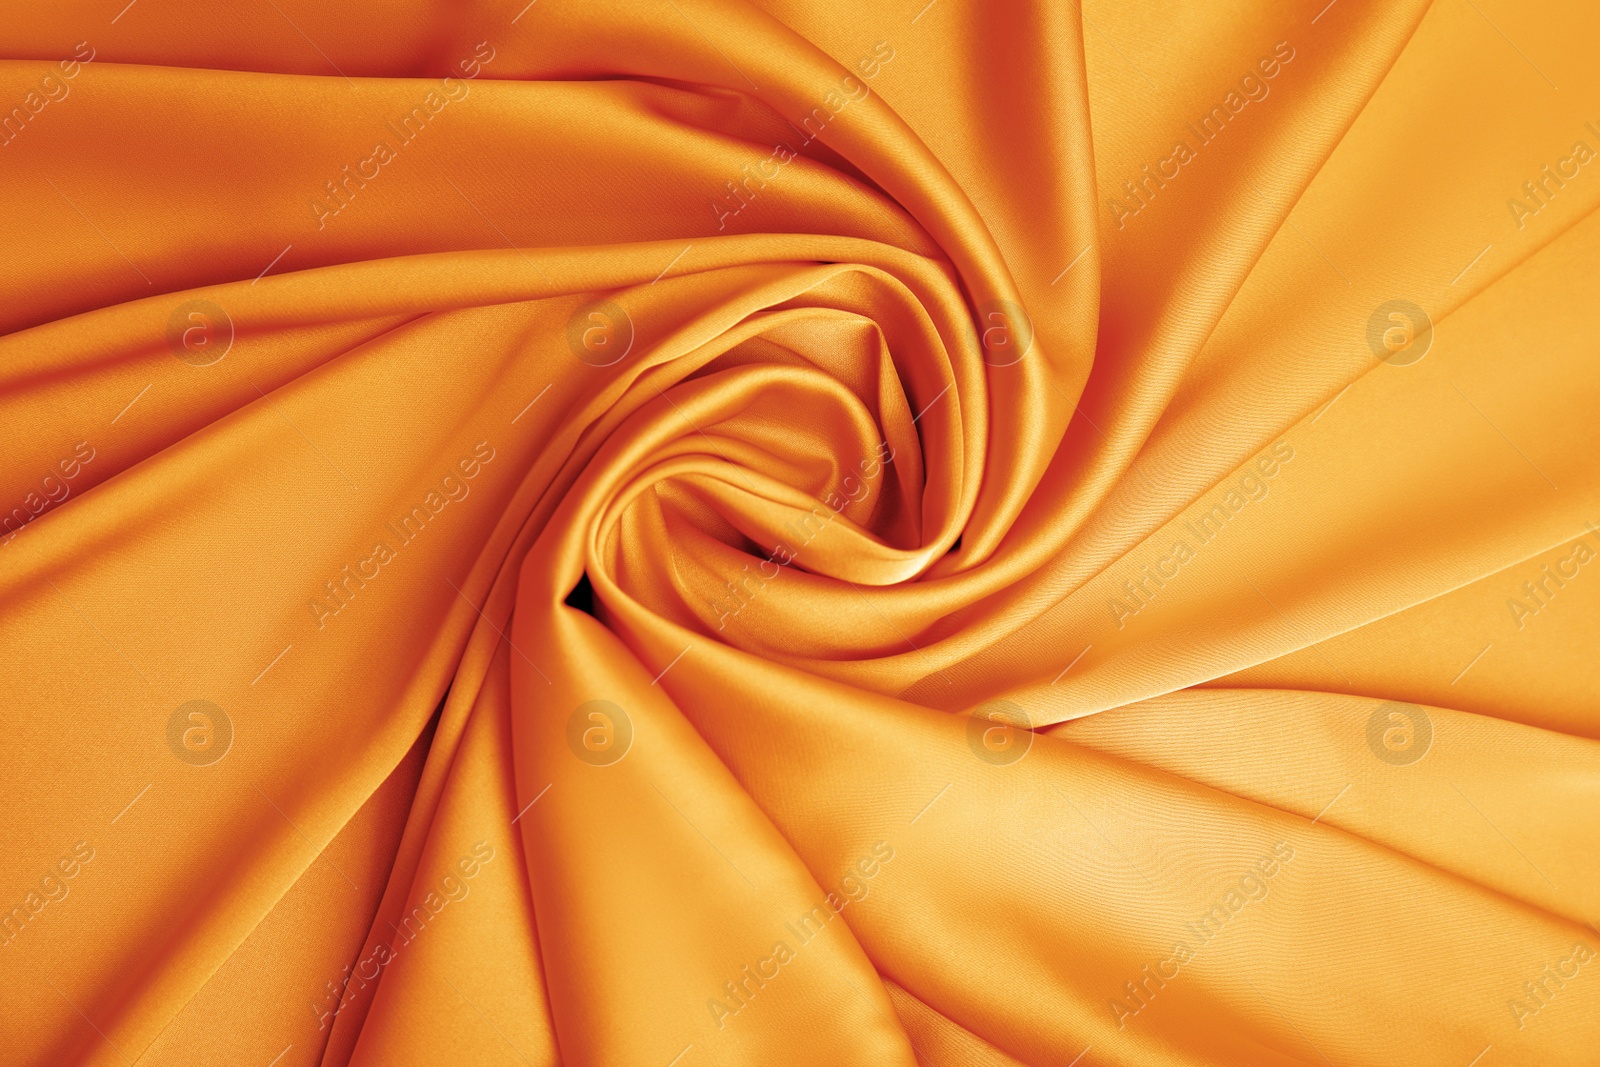 Image of Delicate orange silk fabric as background, top view